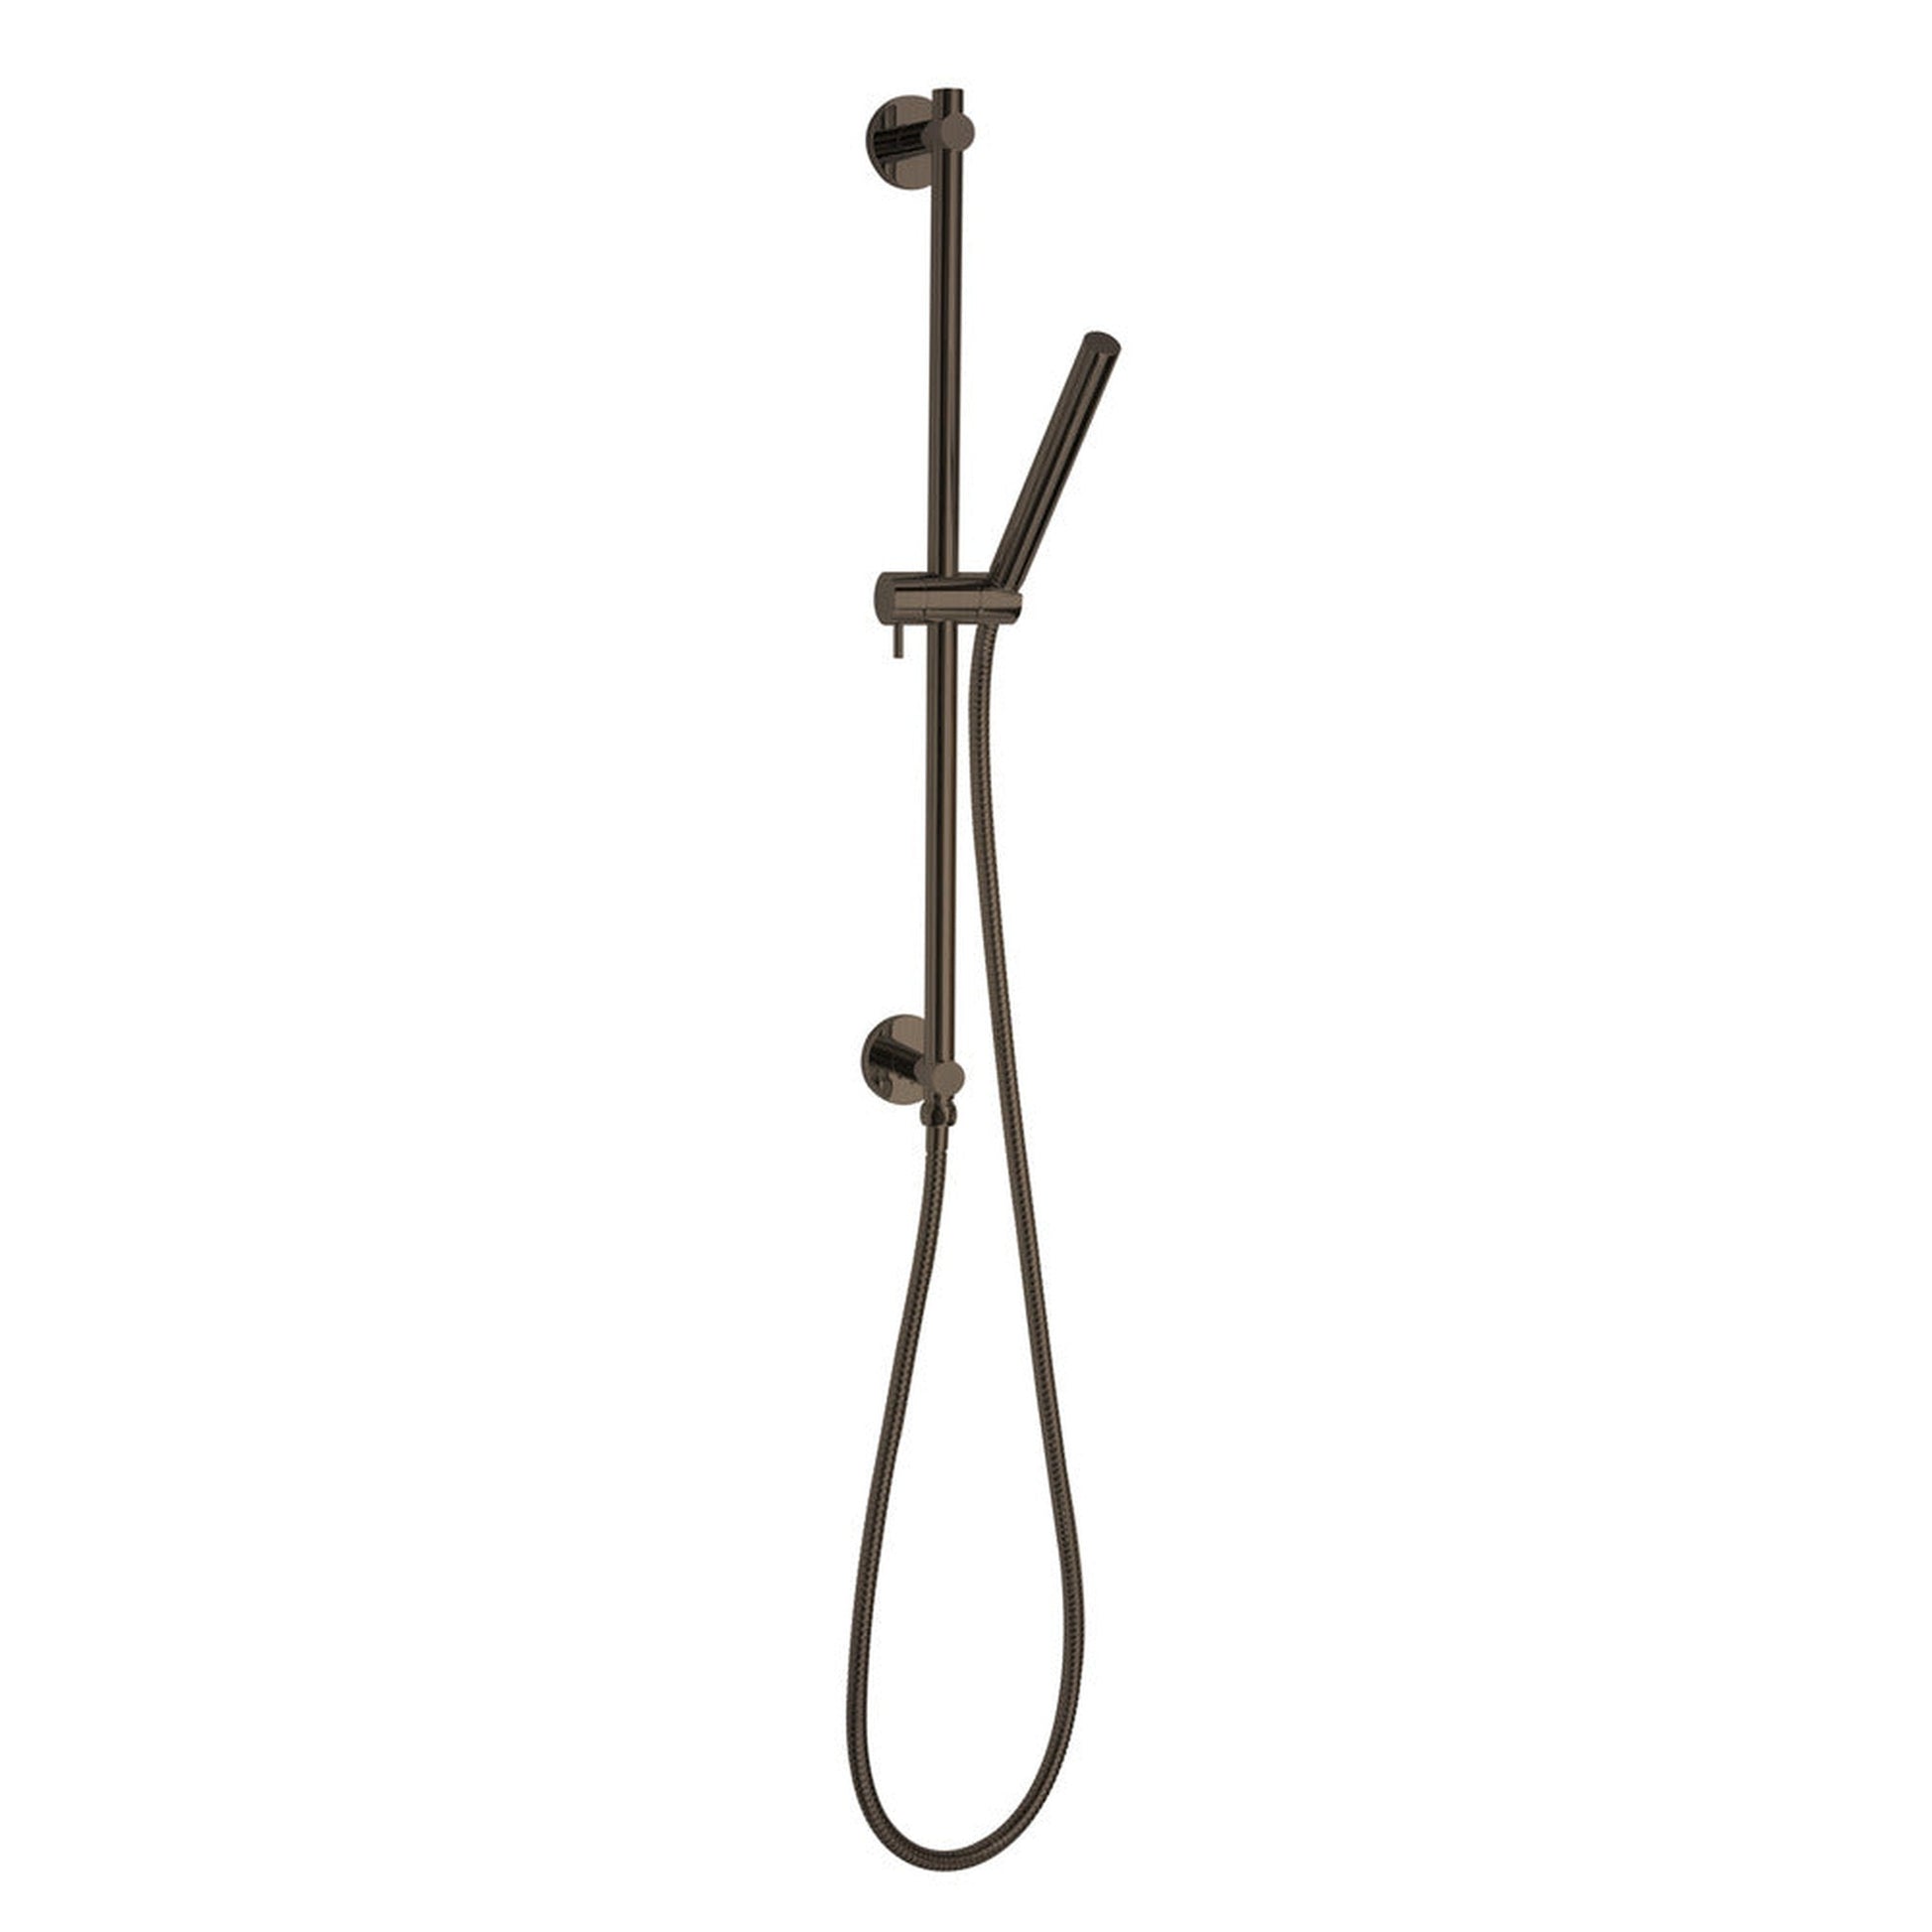 ThermaSol Oil Rubbed Bronze Finish Round Shower Rail, Hose, and Wand Kit